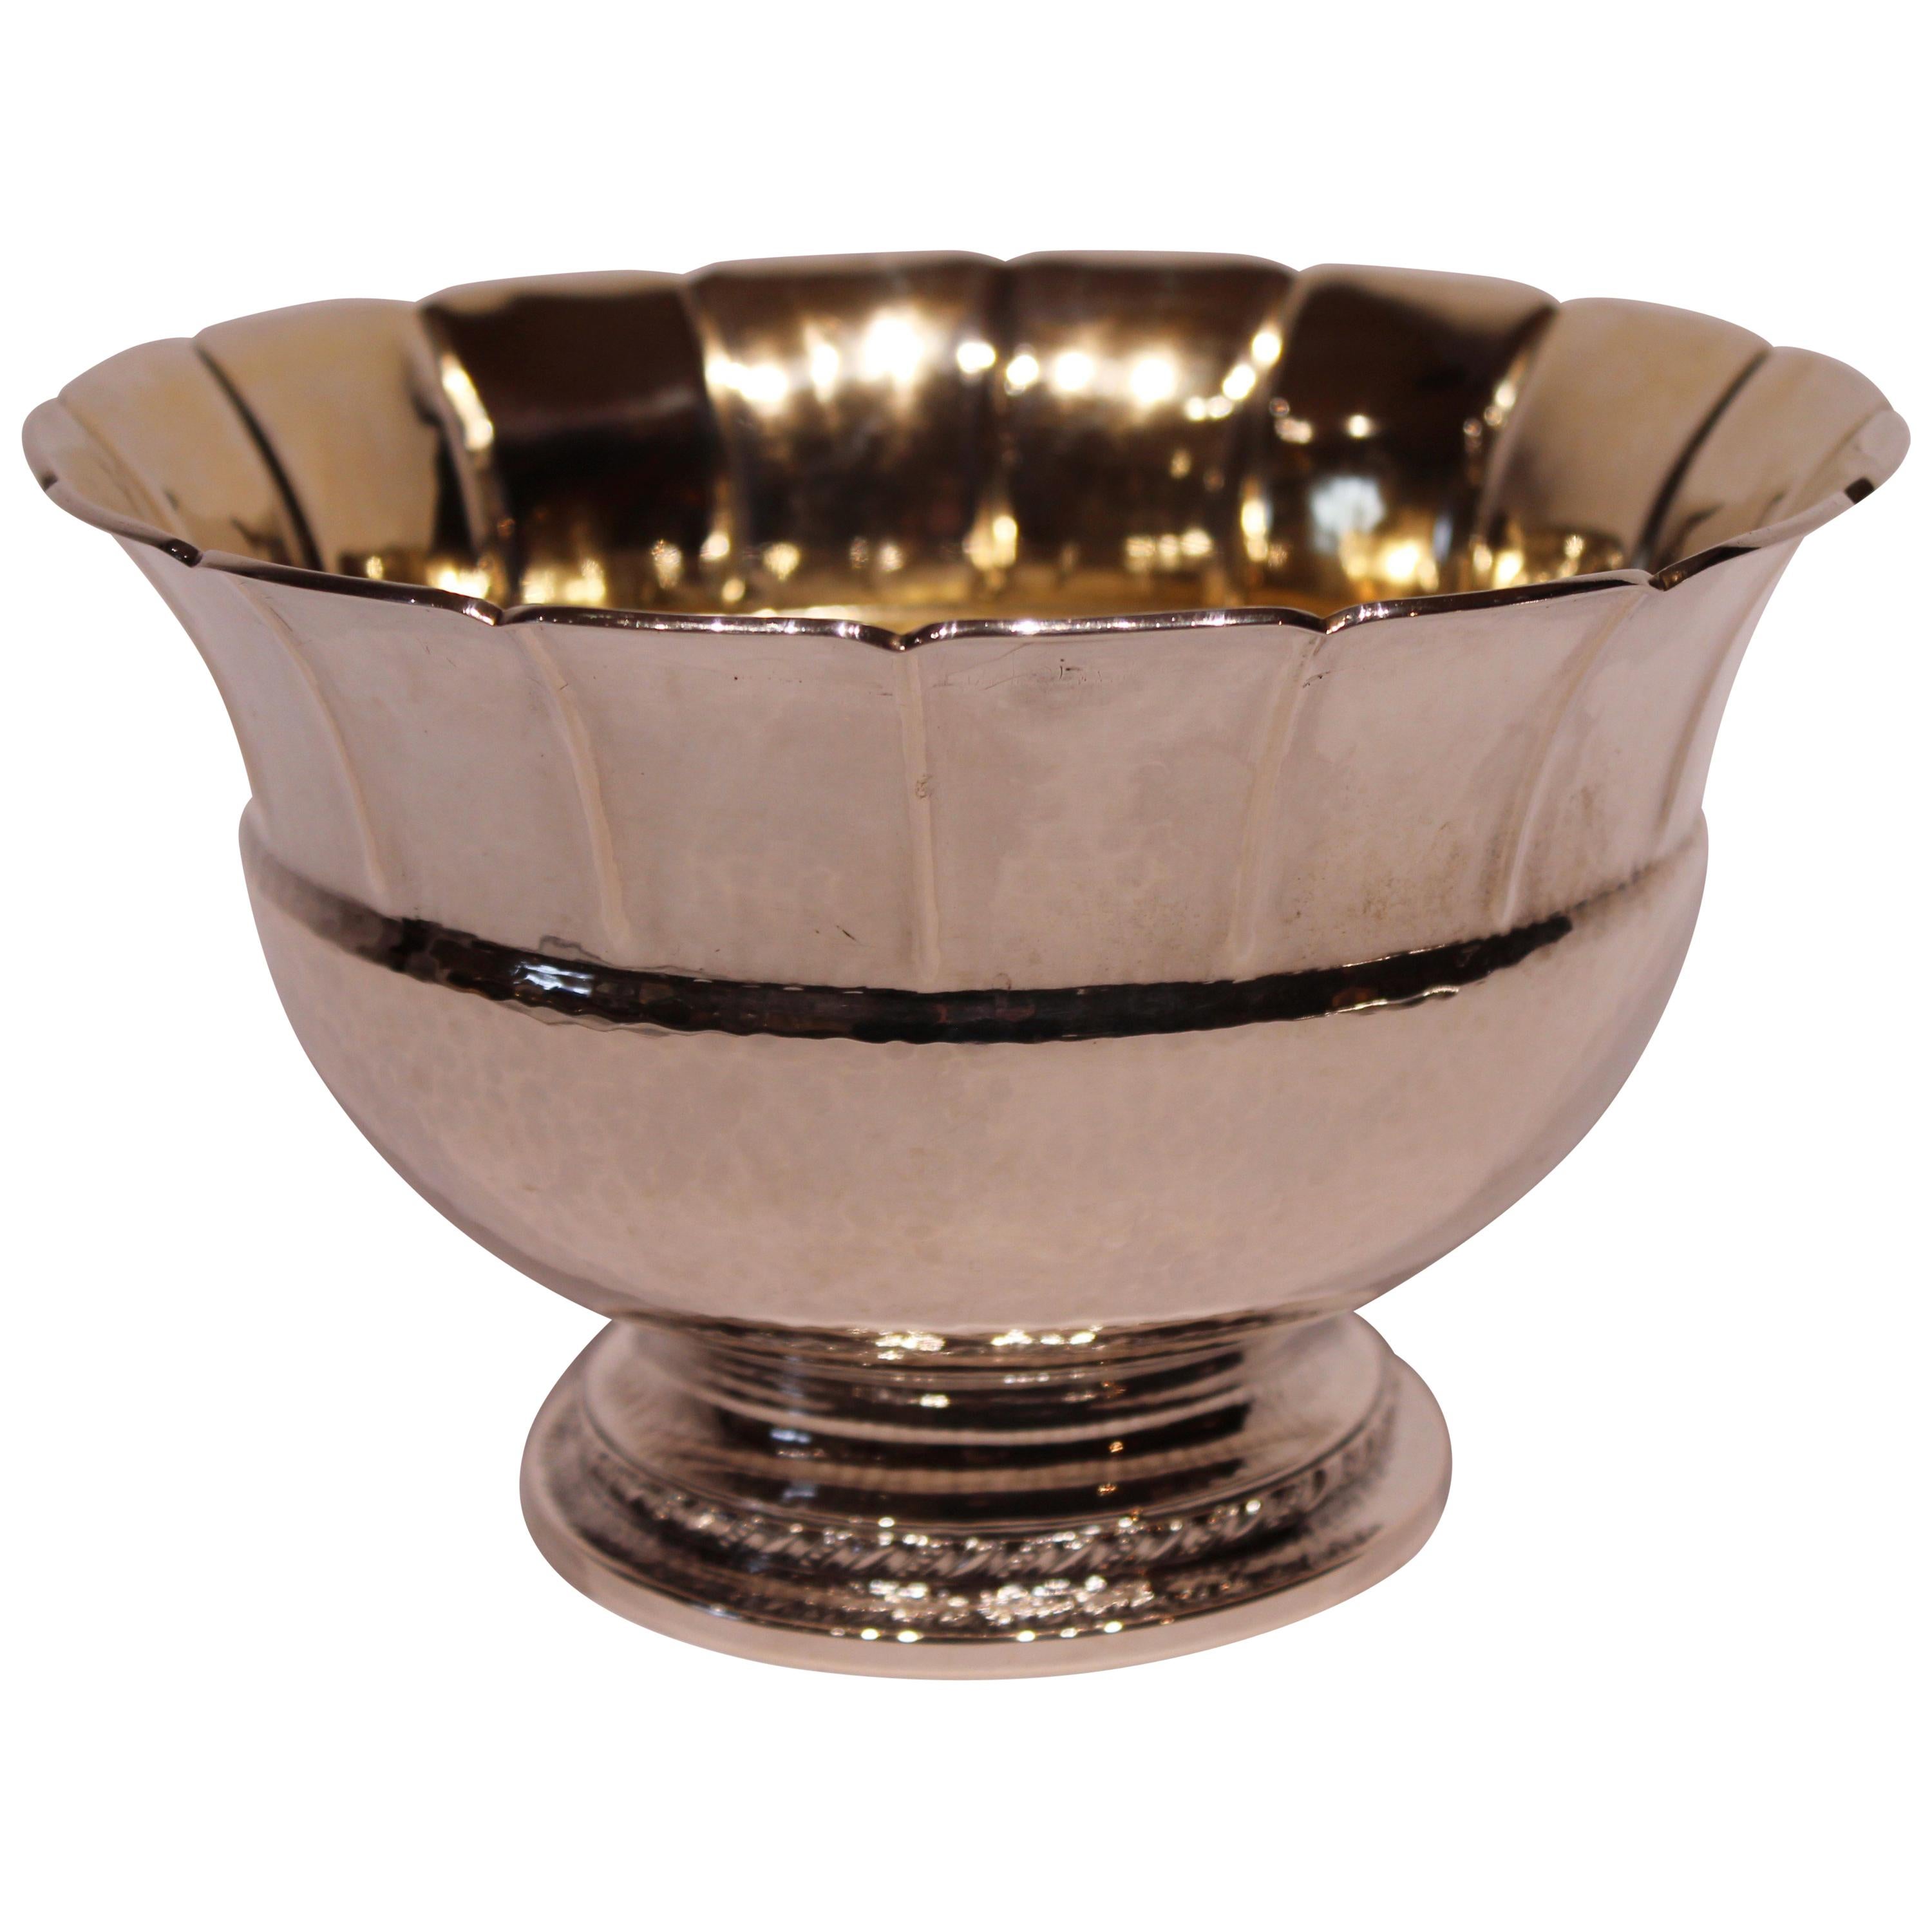 Bowl on Feet of Hallmarked Silver and Simply Decorated